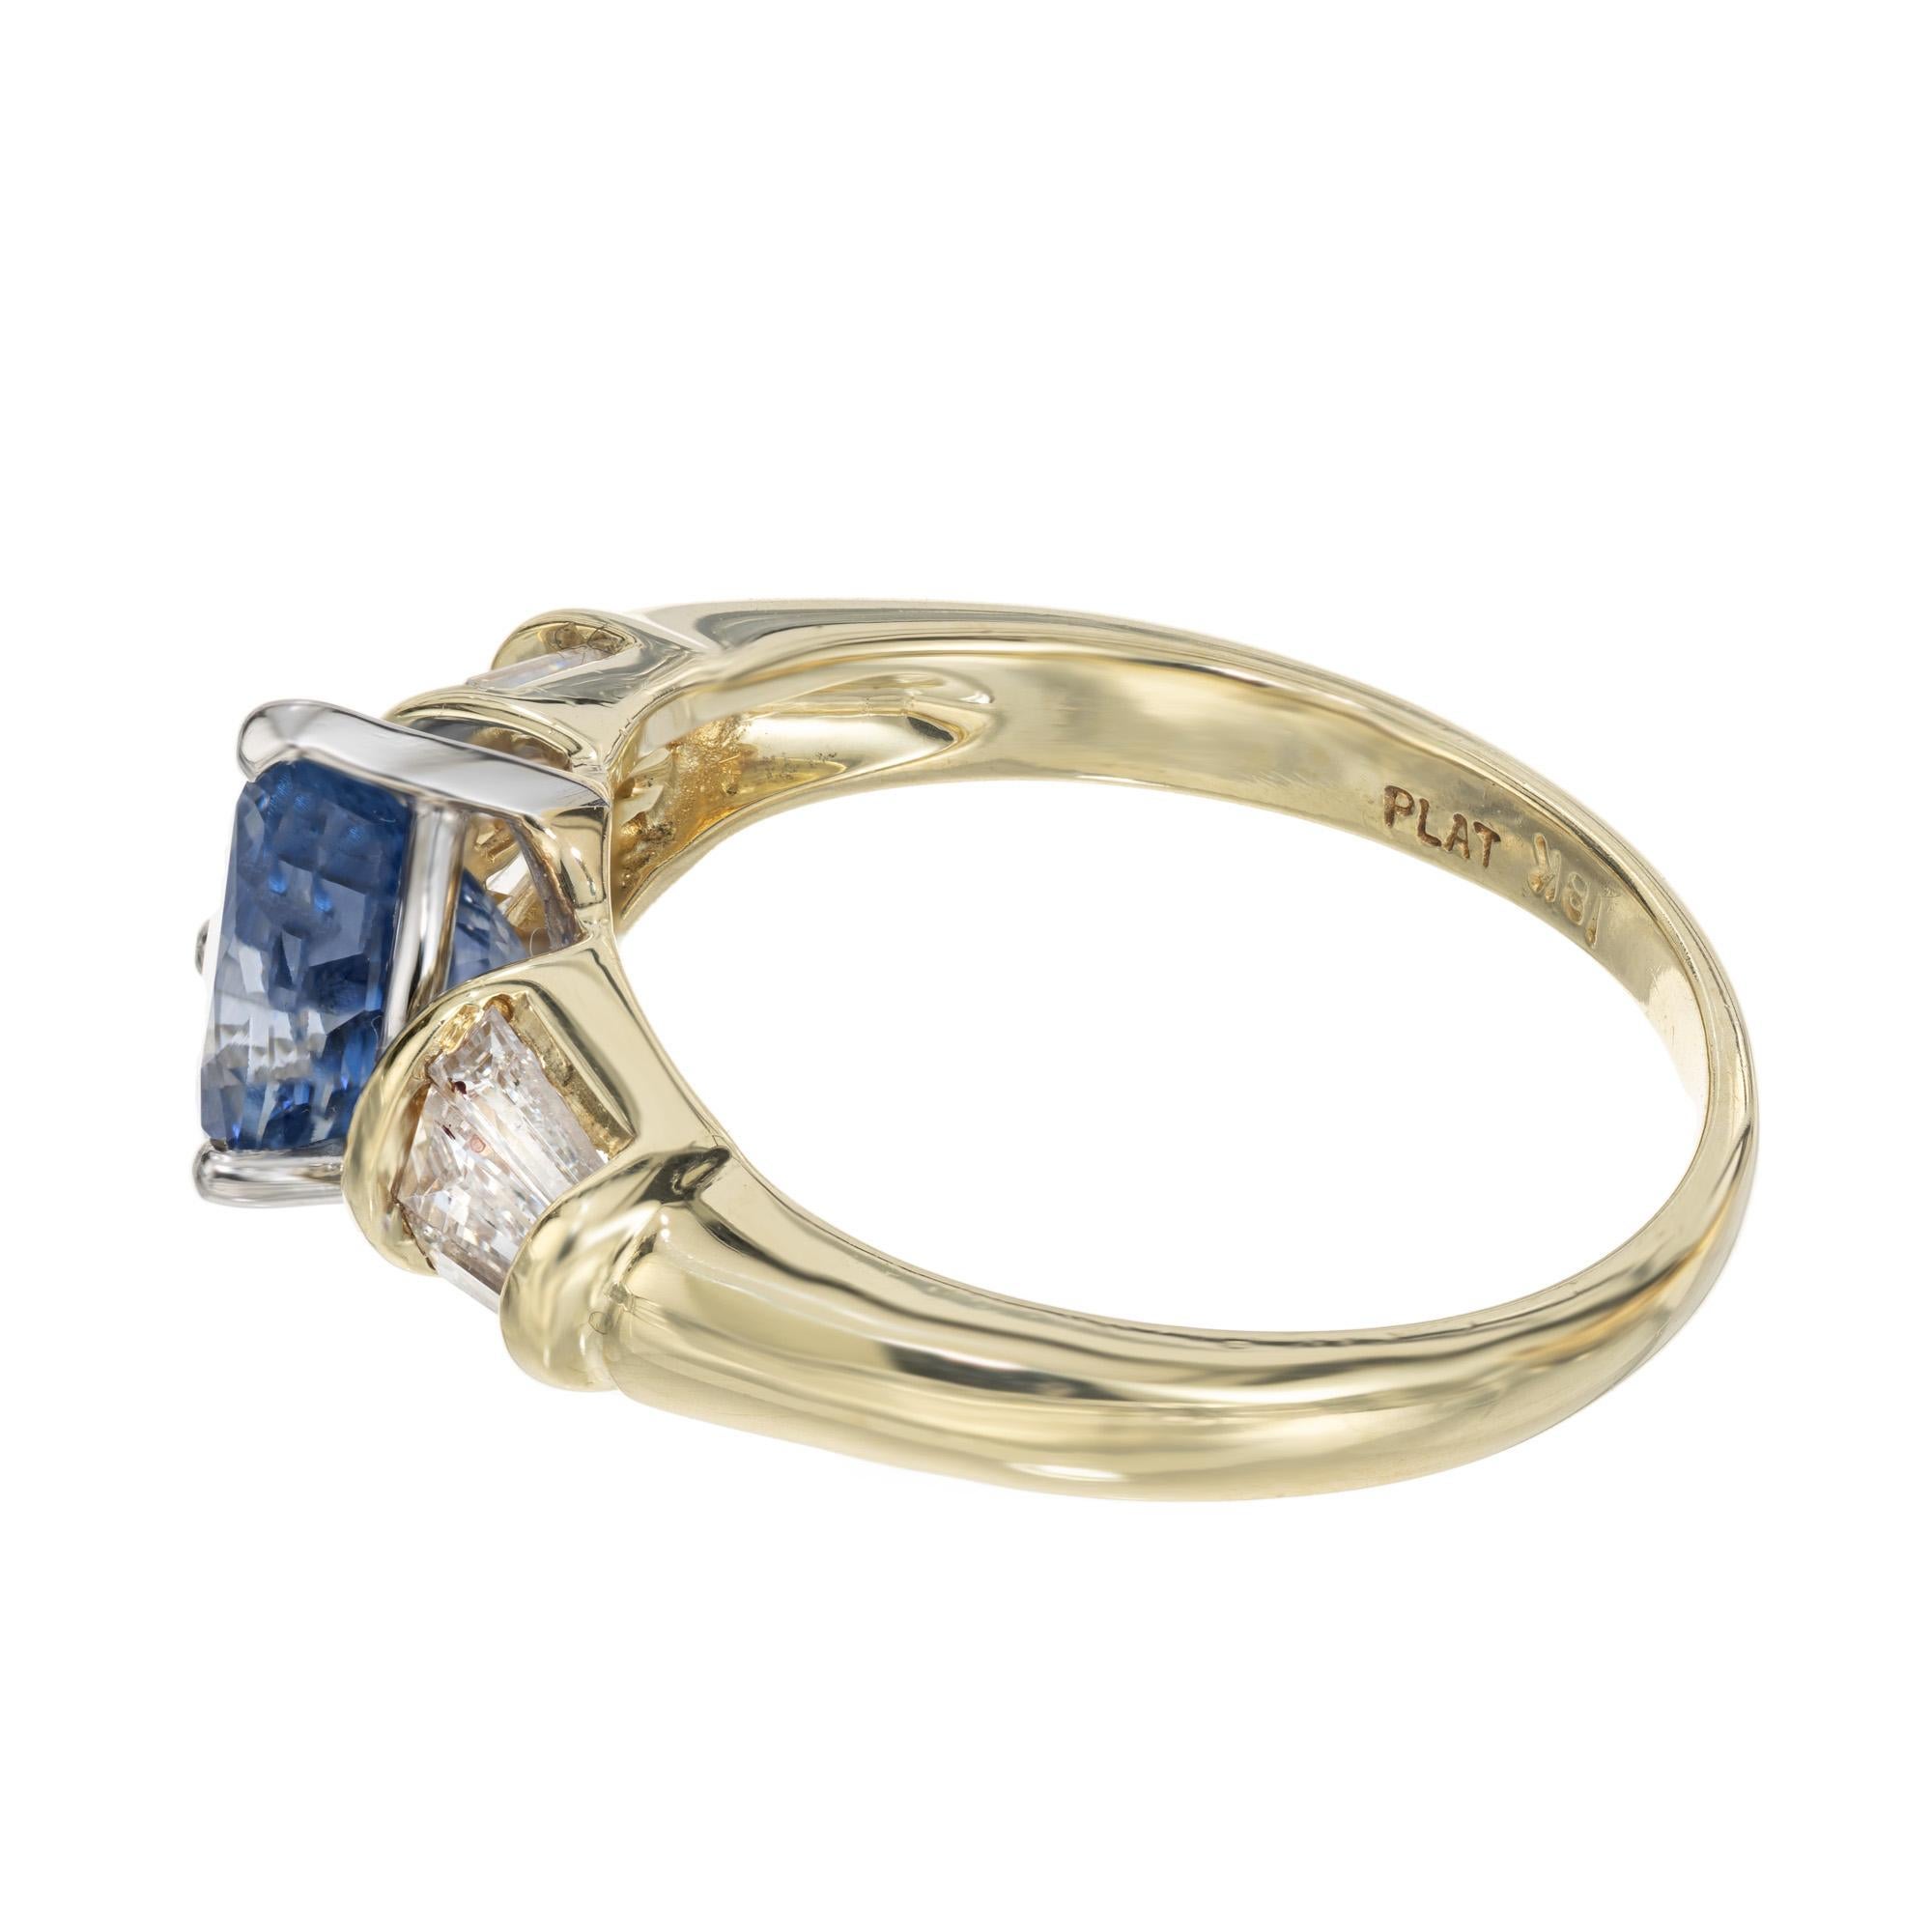 2.27 Carat Pear Shaped Sapphire Baguette Diamond Platinum Gold Engagement Ring In Good Condition For Sale In Stamford, CT